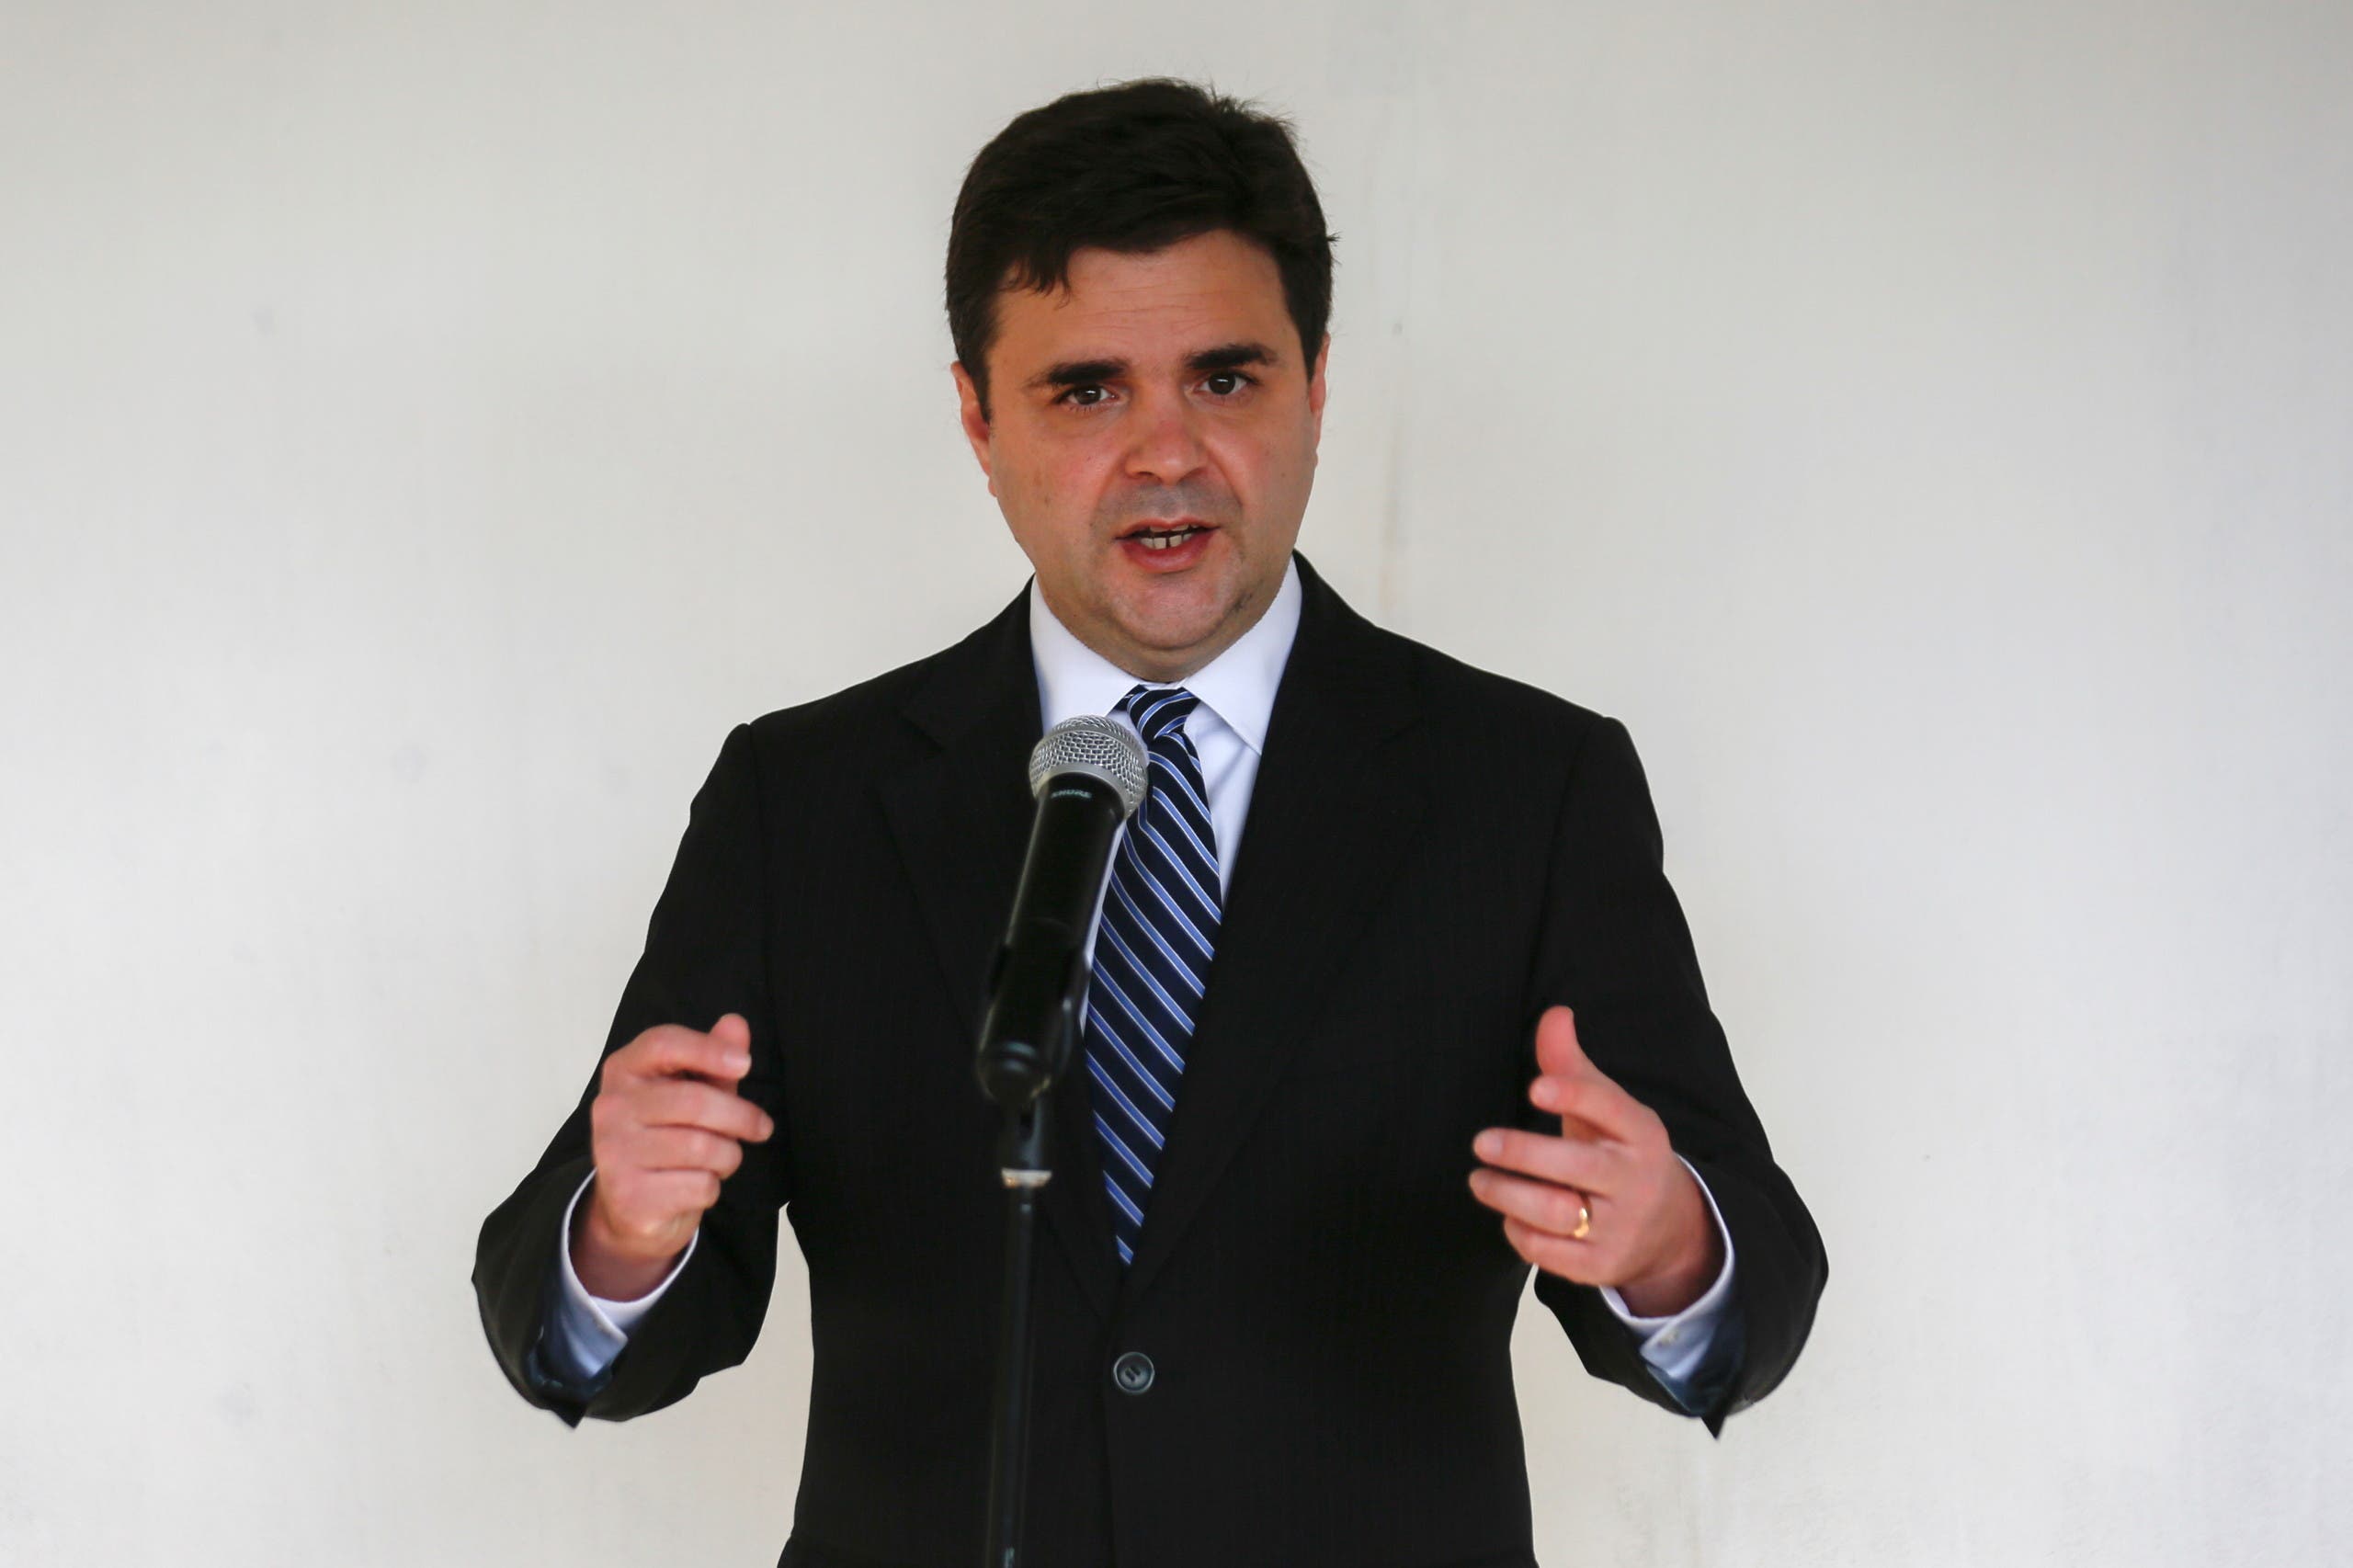 Ricardo Zuniga, US President Joe Biden's special envoy for the Northern Triangle, speaks with the media after a TV interview in San Salvador, El Salvador May 12, 2021. (Reuters)